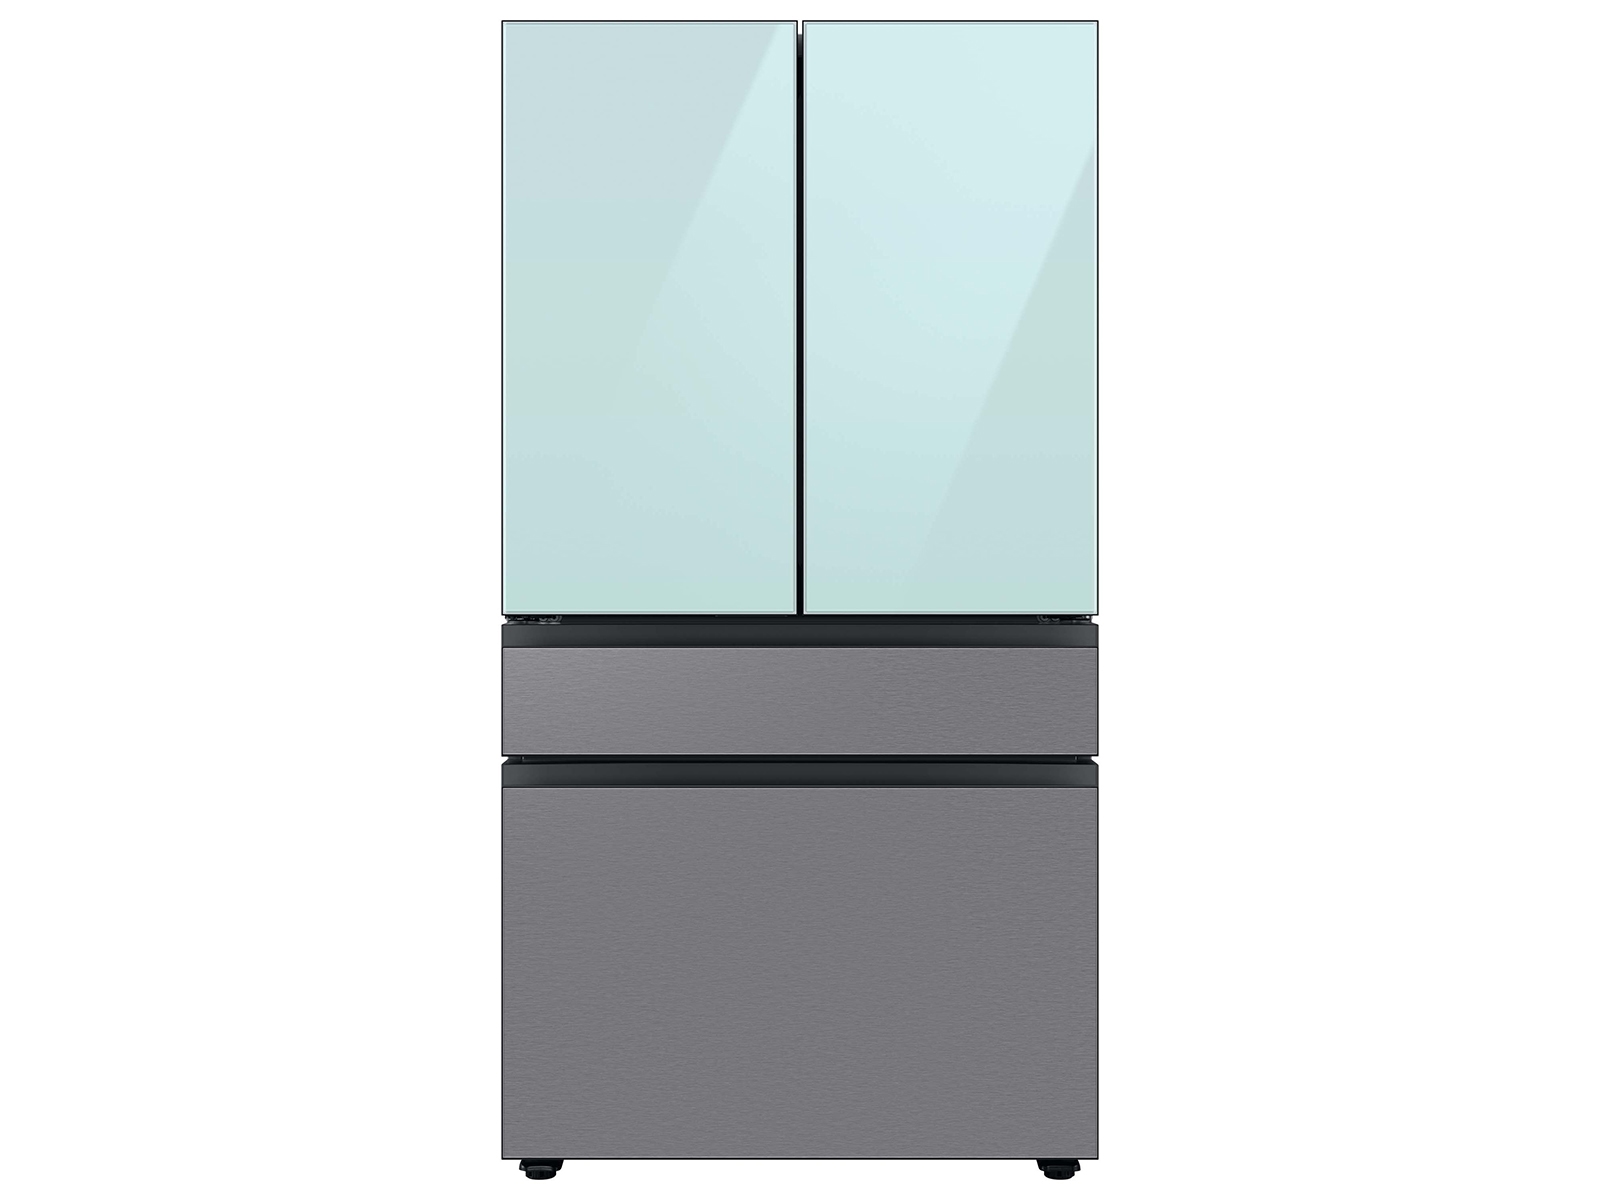 Thumbnail image of Bespoke 4-Door French Door Refrigerator Panel in Stainless Steel - Middle Panel